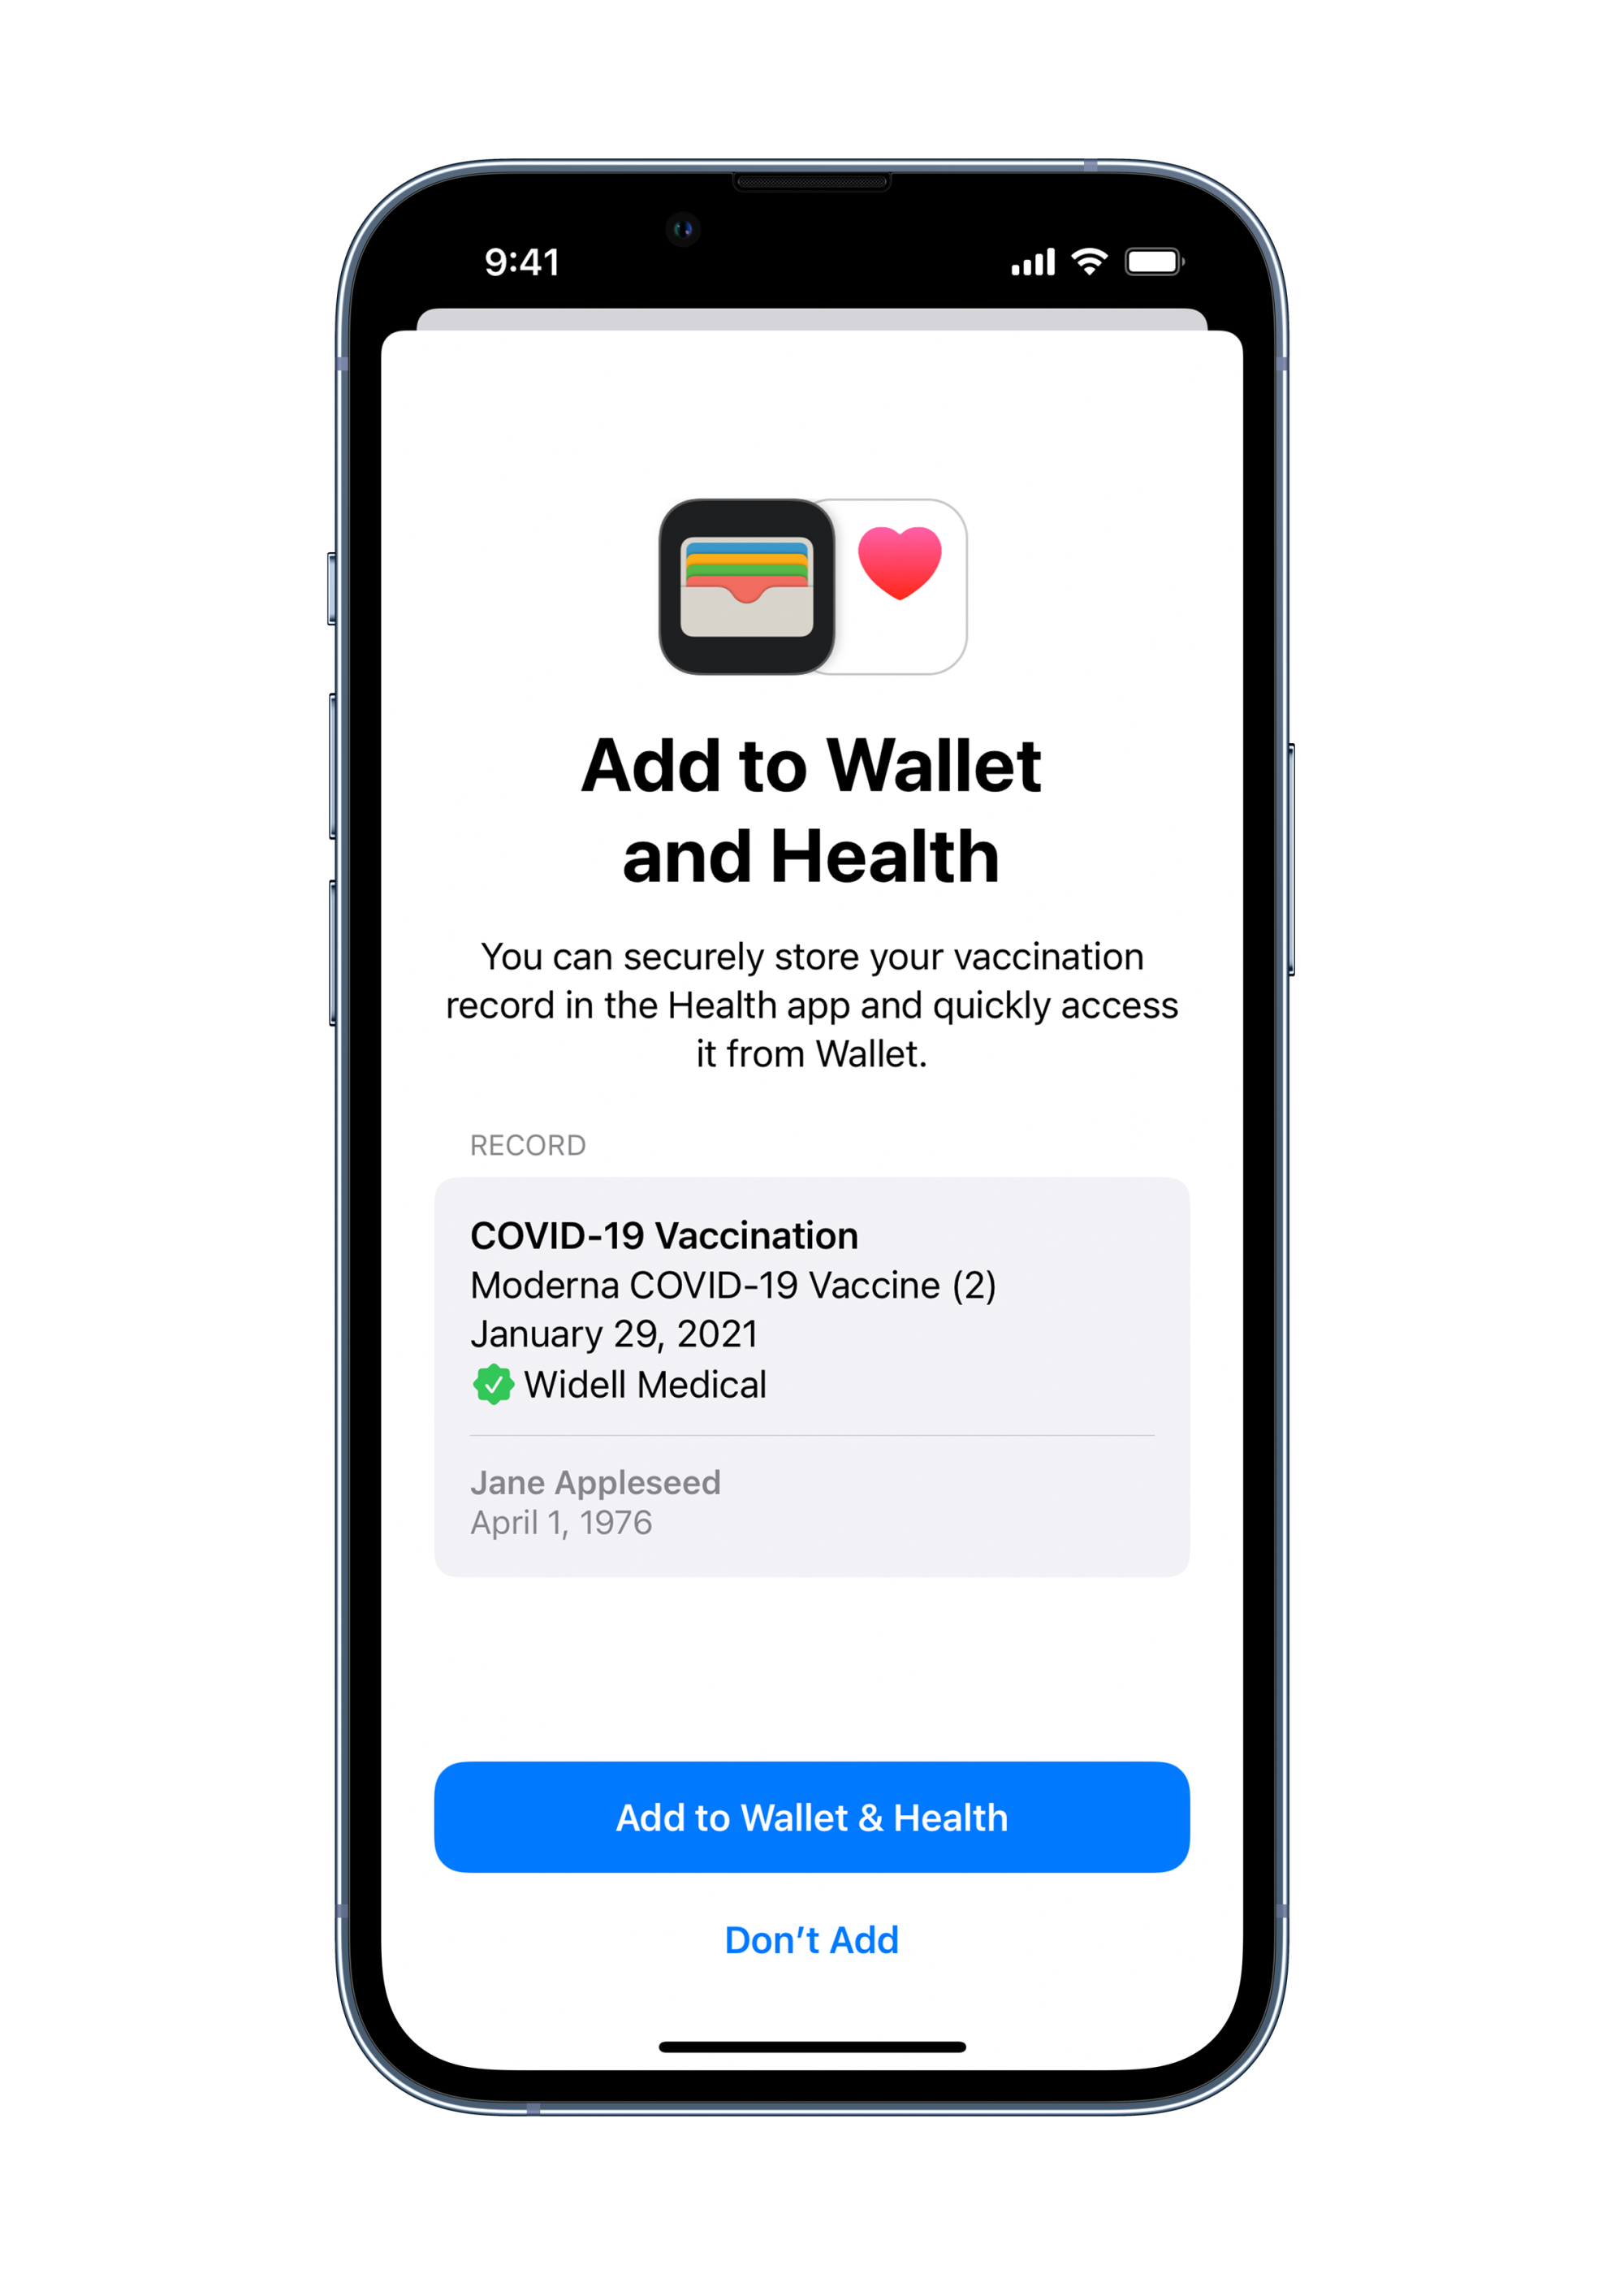 Once you add your COVID vaccine card to your Apple wallet, you'll be able to access it just by double tapping the side button.